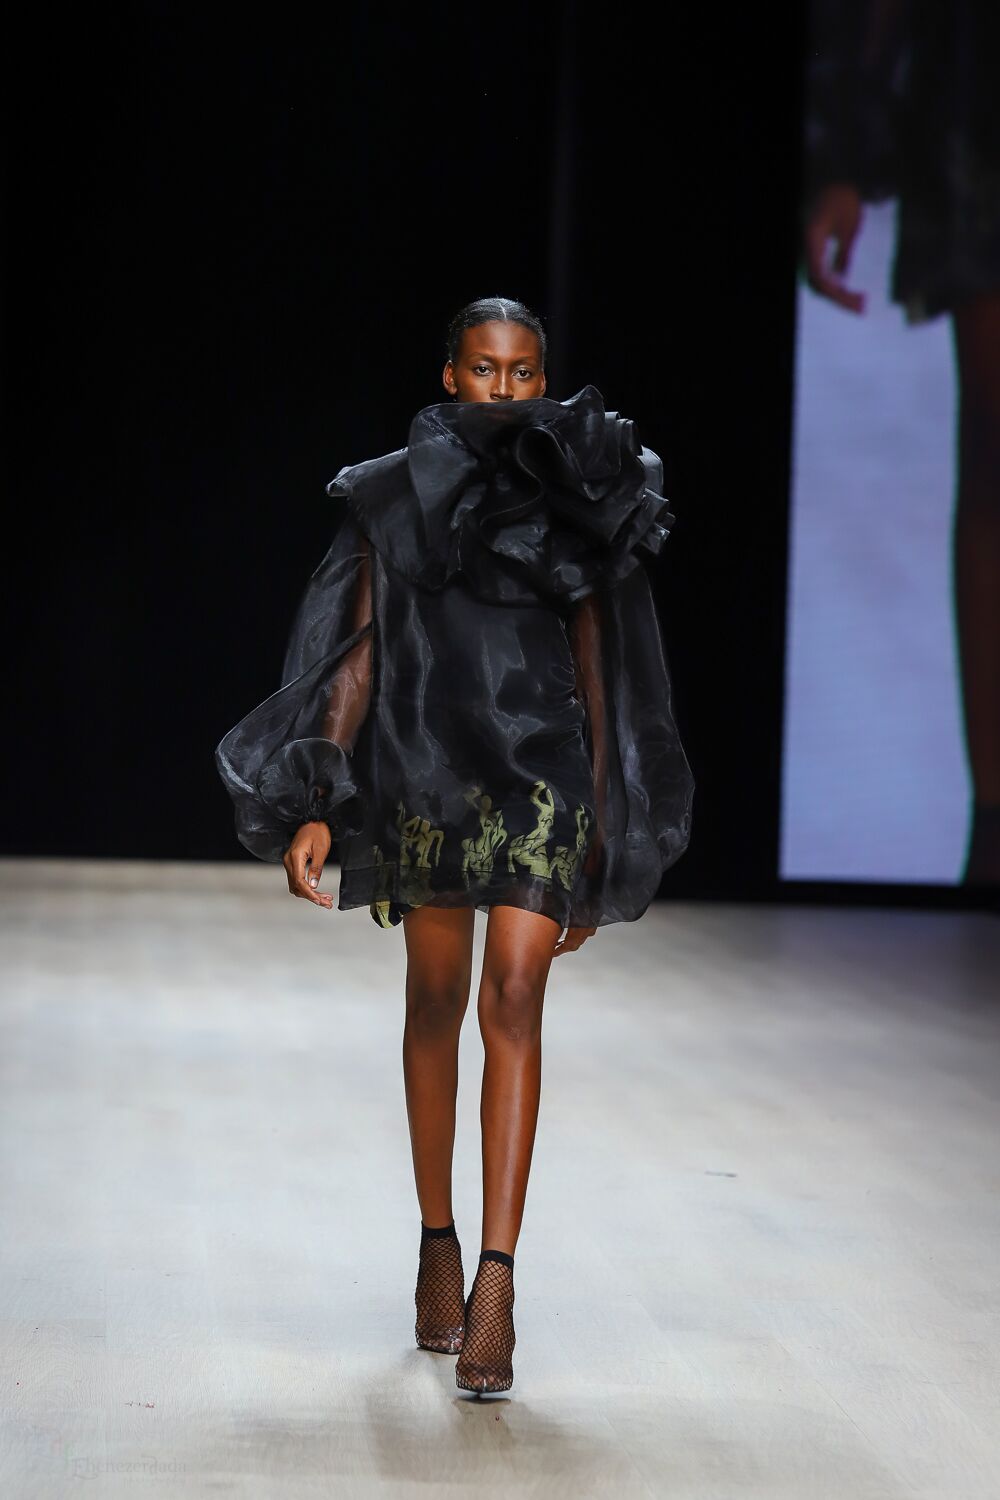 SR Review: Tiffany Amber's AW19 Collection Is For The Girl On Fire